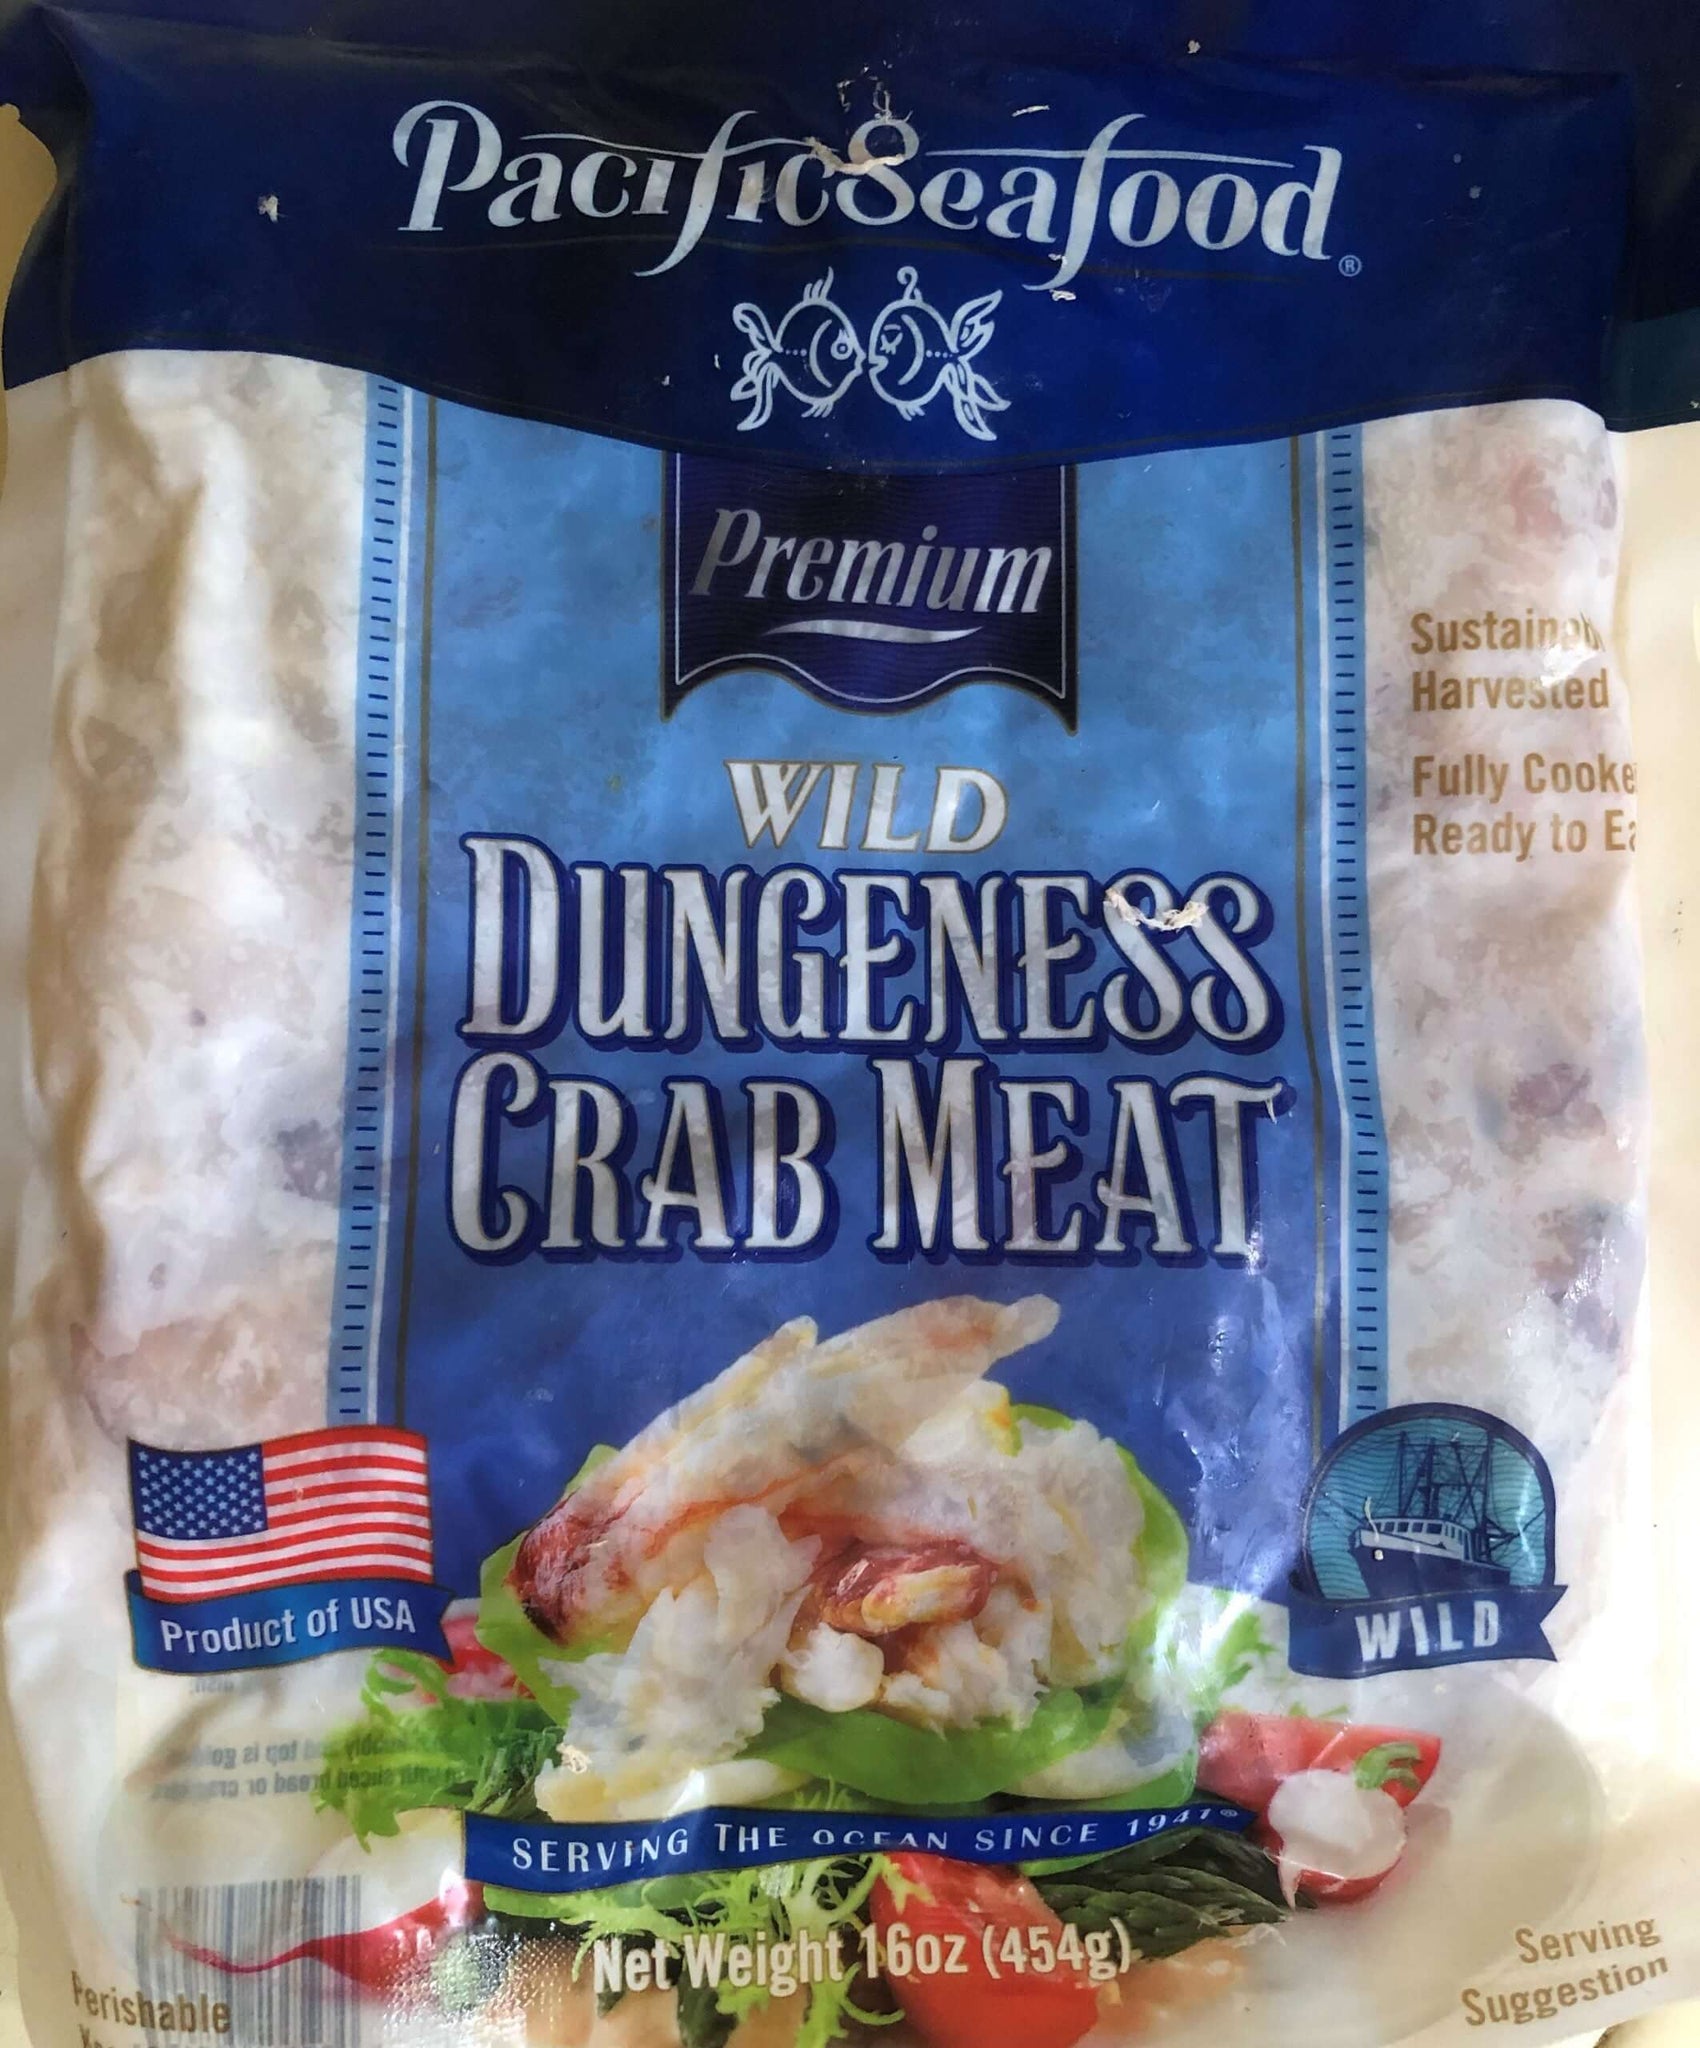 Dungeness Crab Meat (Frozen)